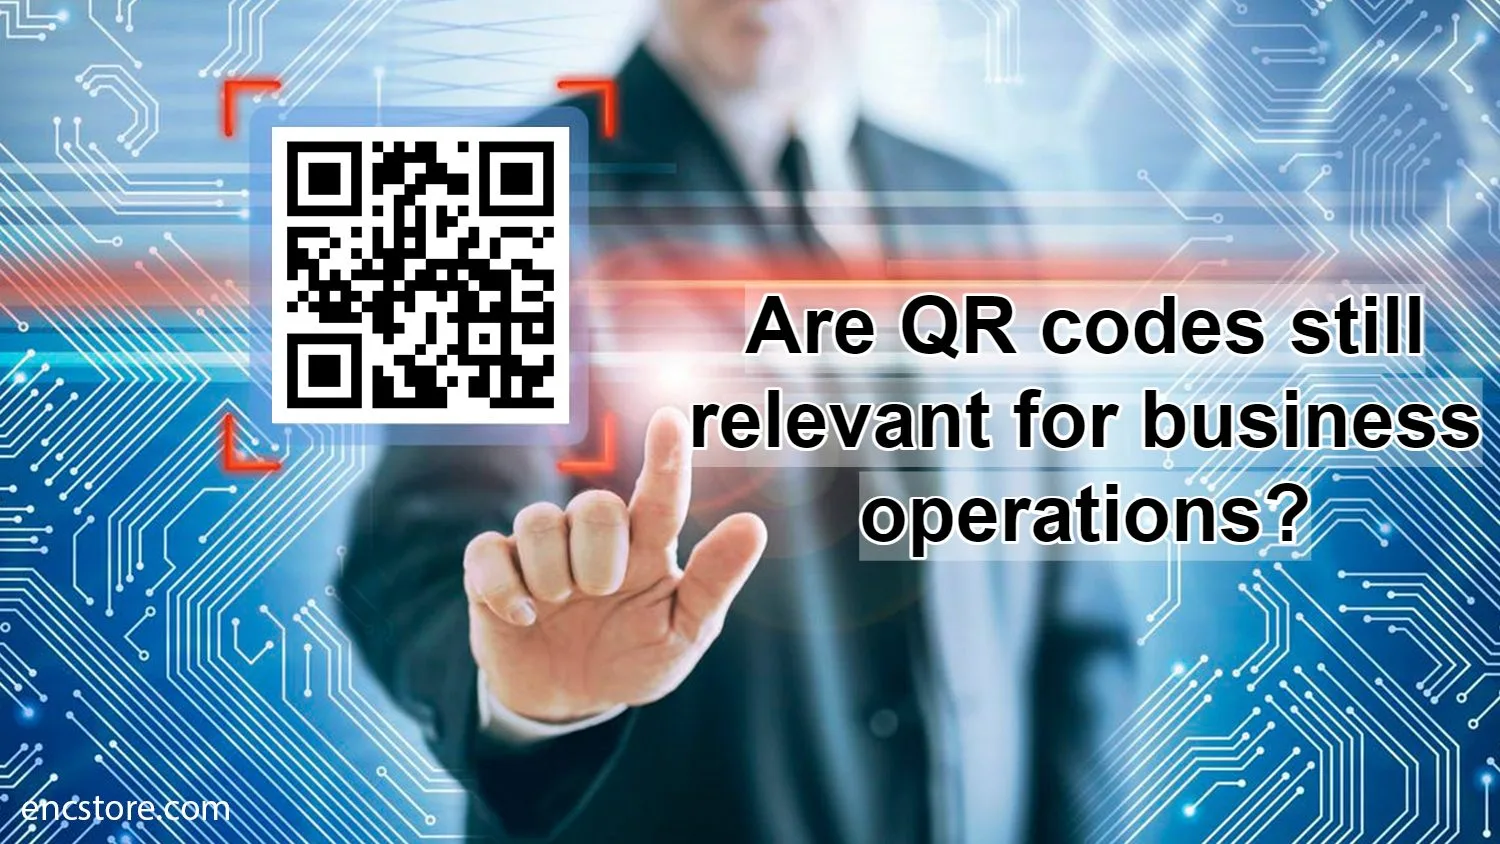 Are QR codes still relevant for business operations